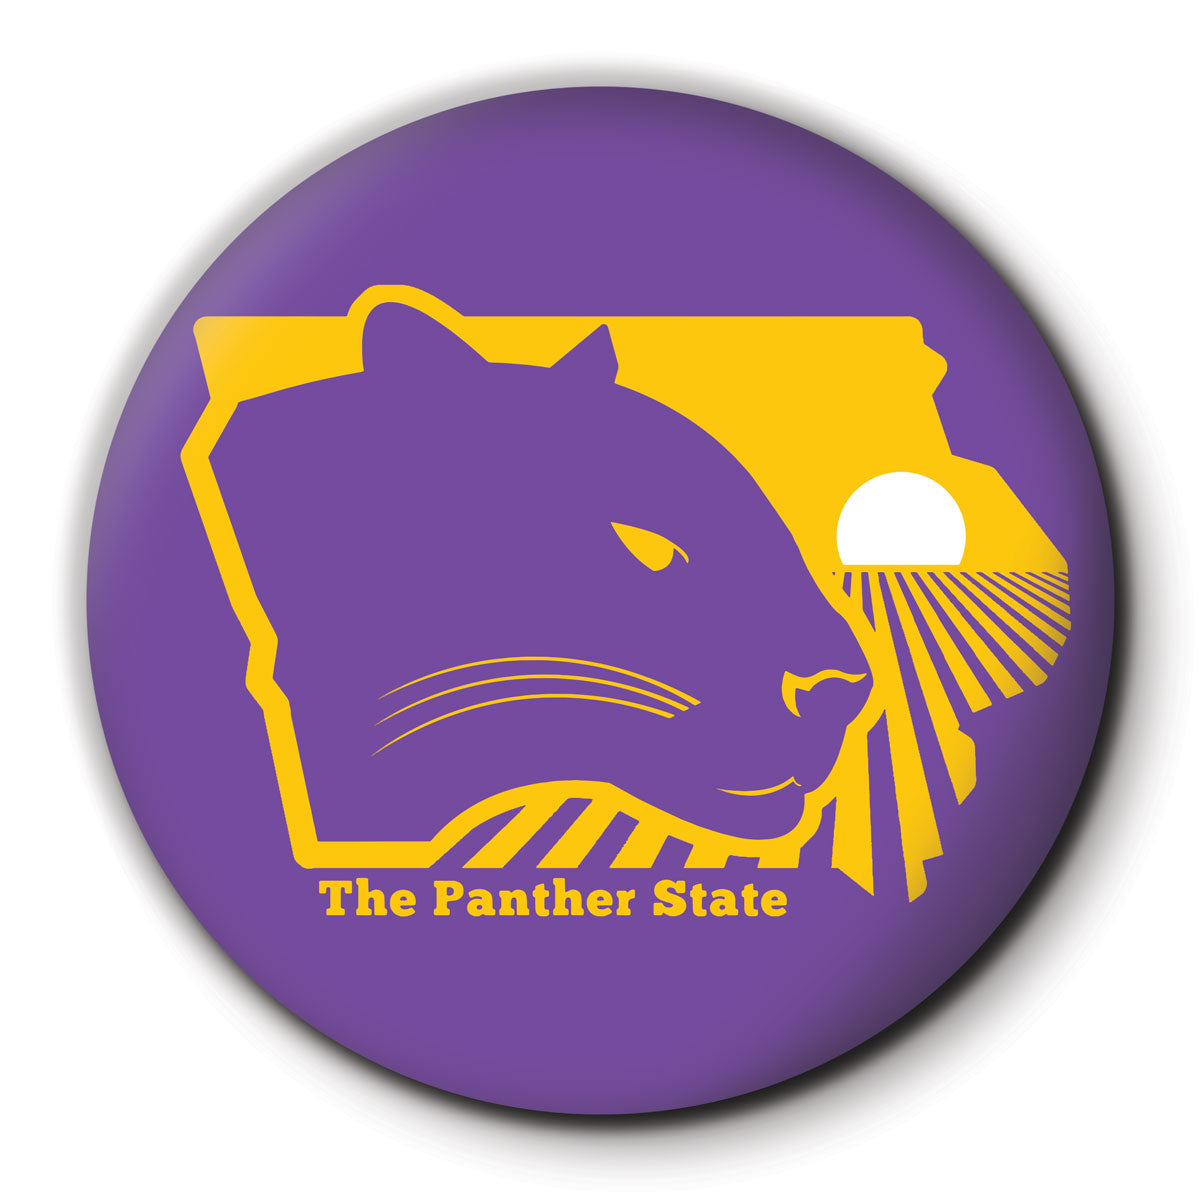 The Panther State Round Coaster - Bozz Prints